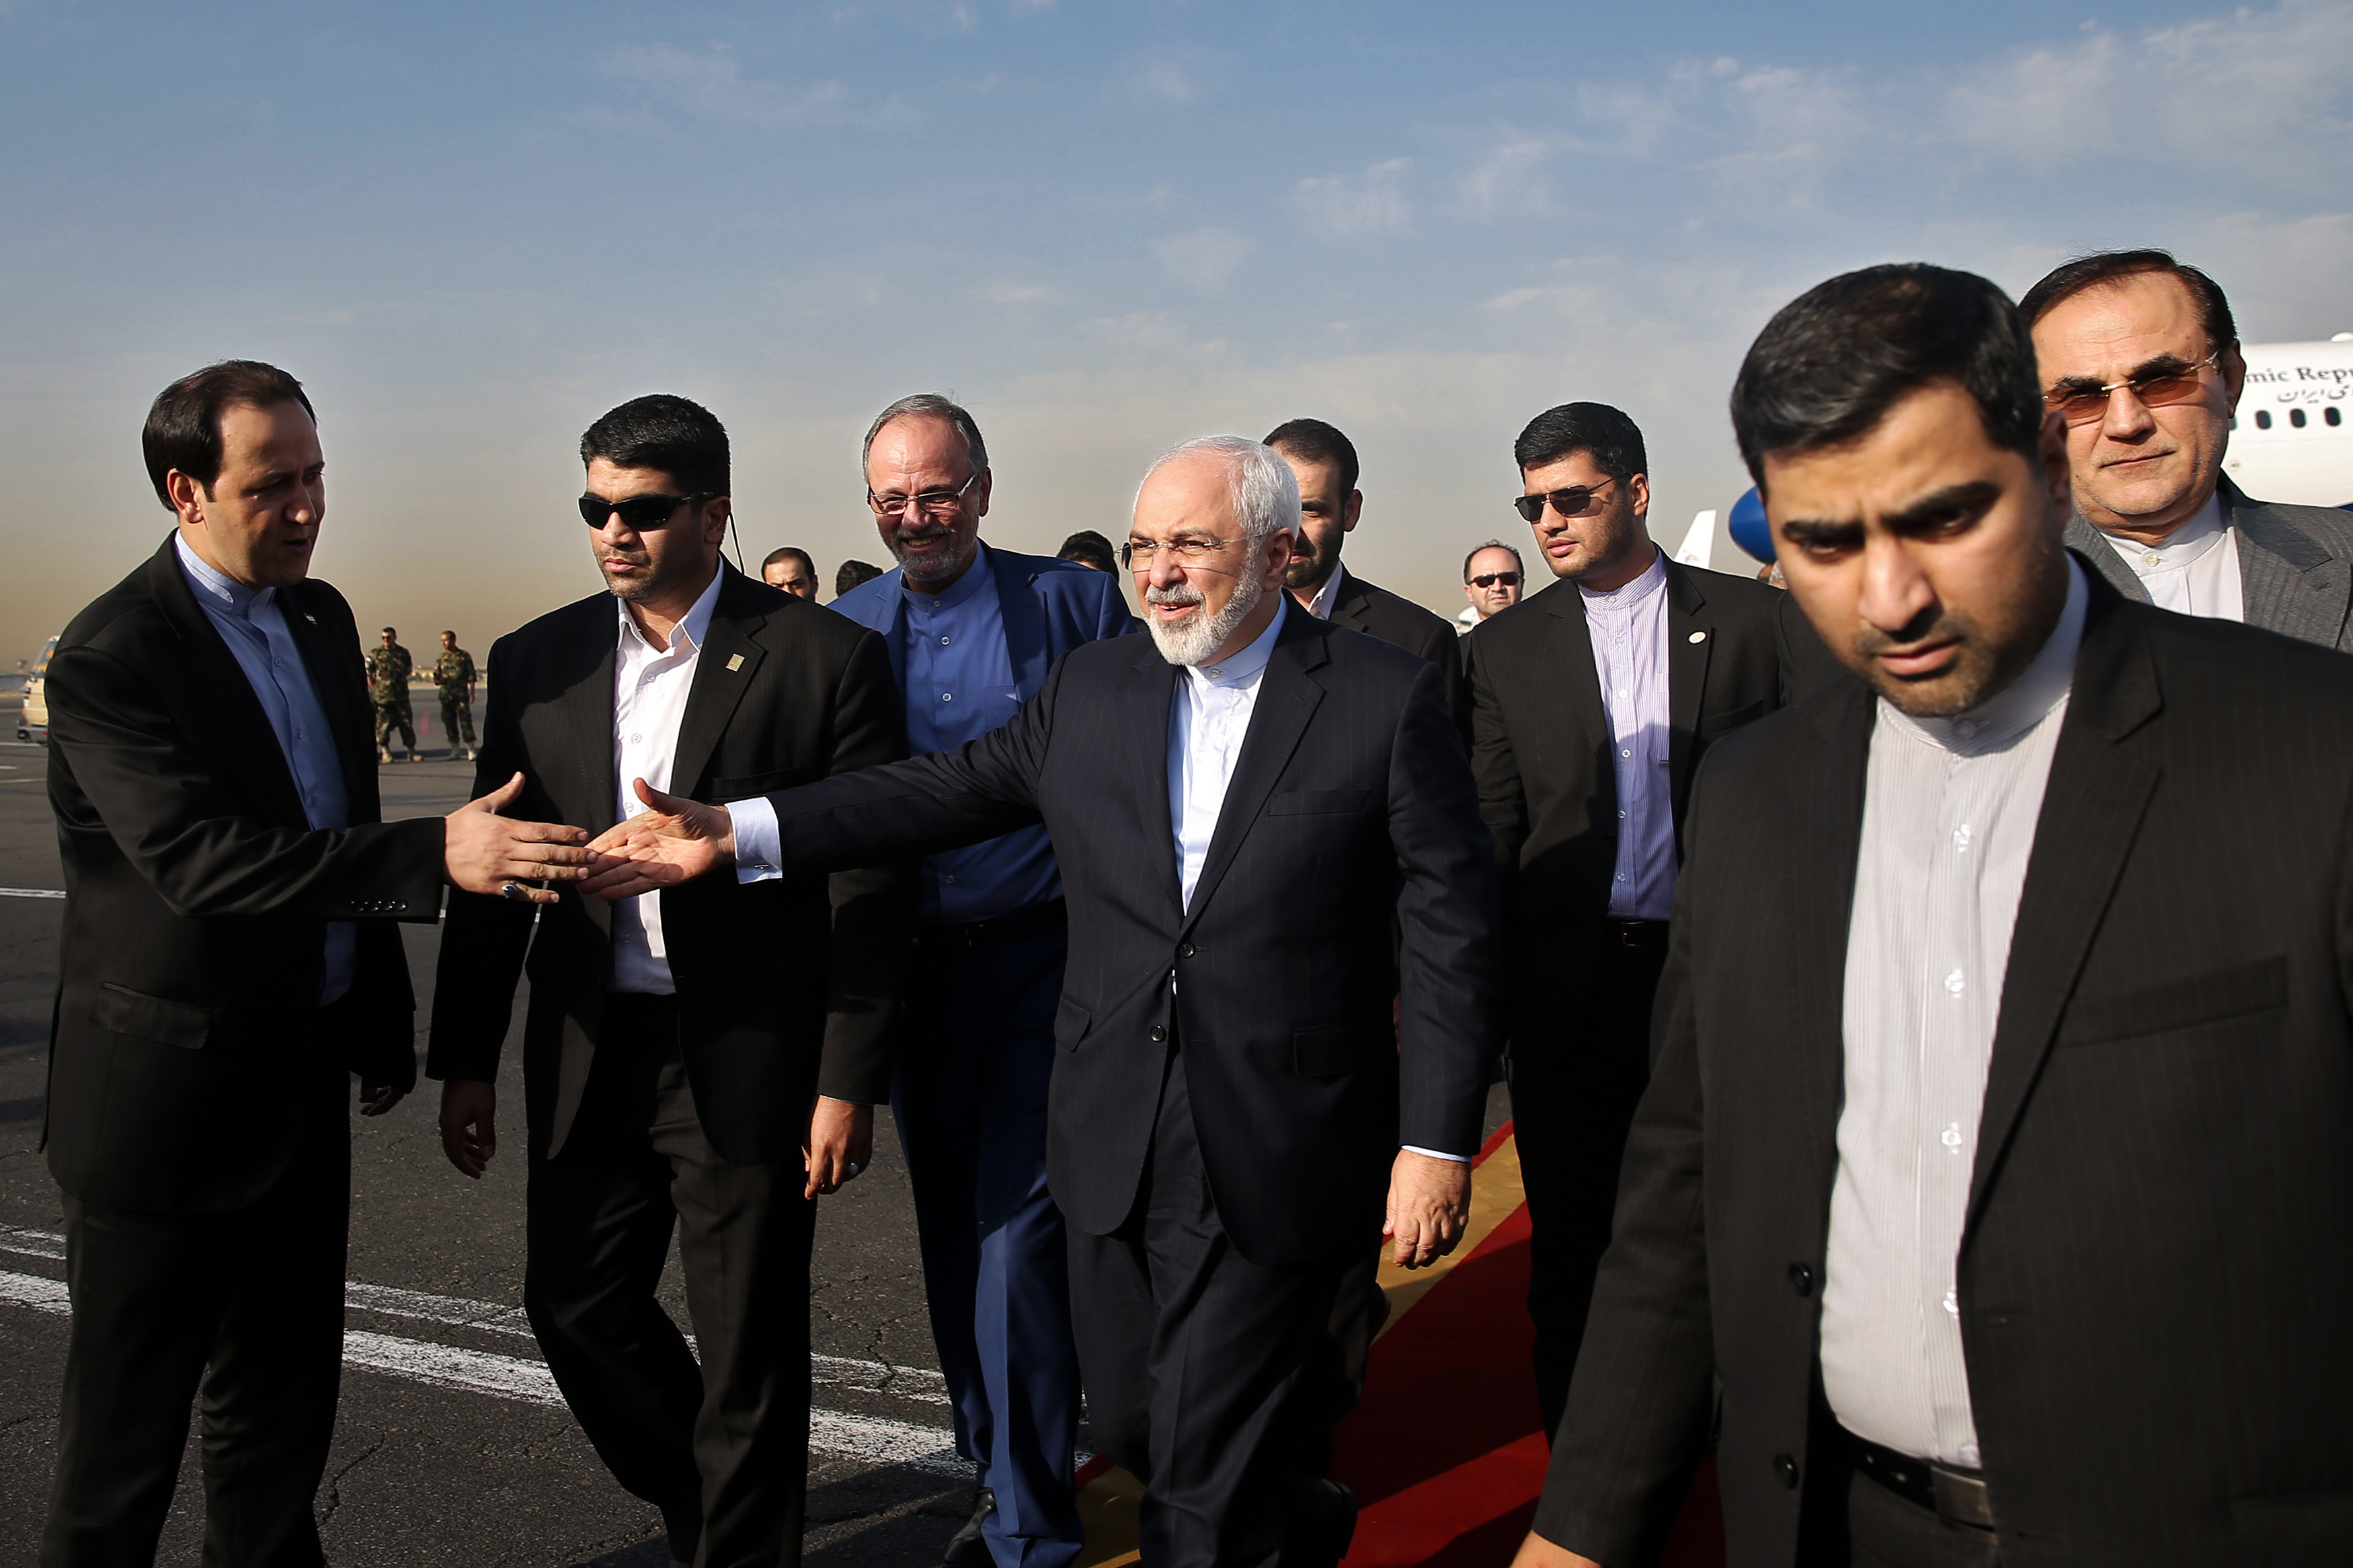 Iran's Foreign Minister Mohammad Javad Zarif, who is also Iran's top nuclear negotiator, center, shakes hands with an official upon arrival at the Mehrabad airport in Tehran, Iran, Wednesday, July 15, 2015. 